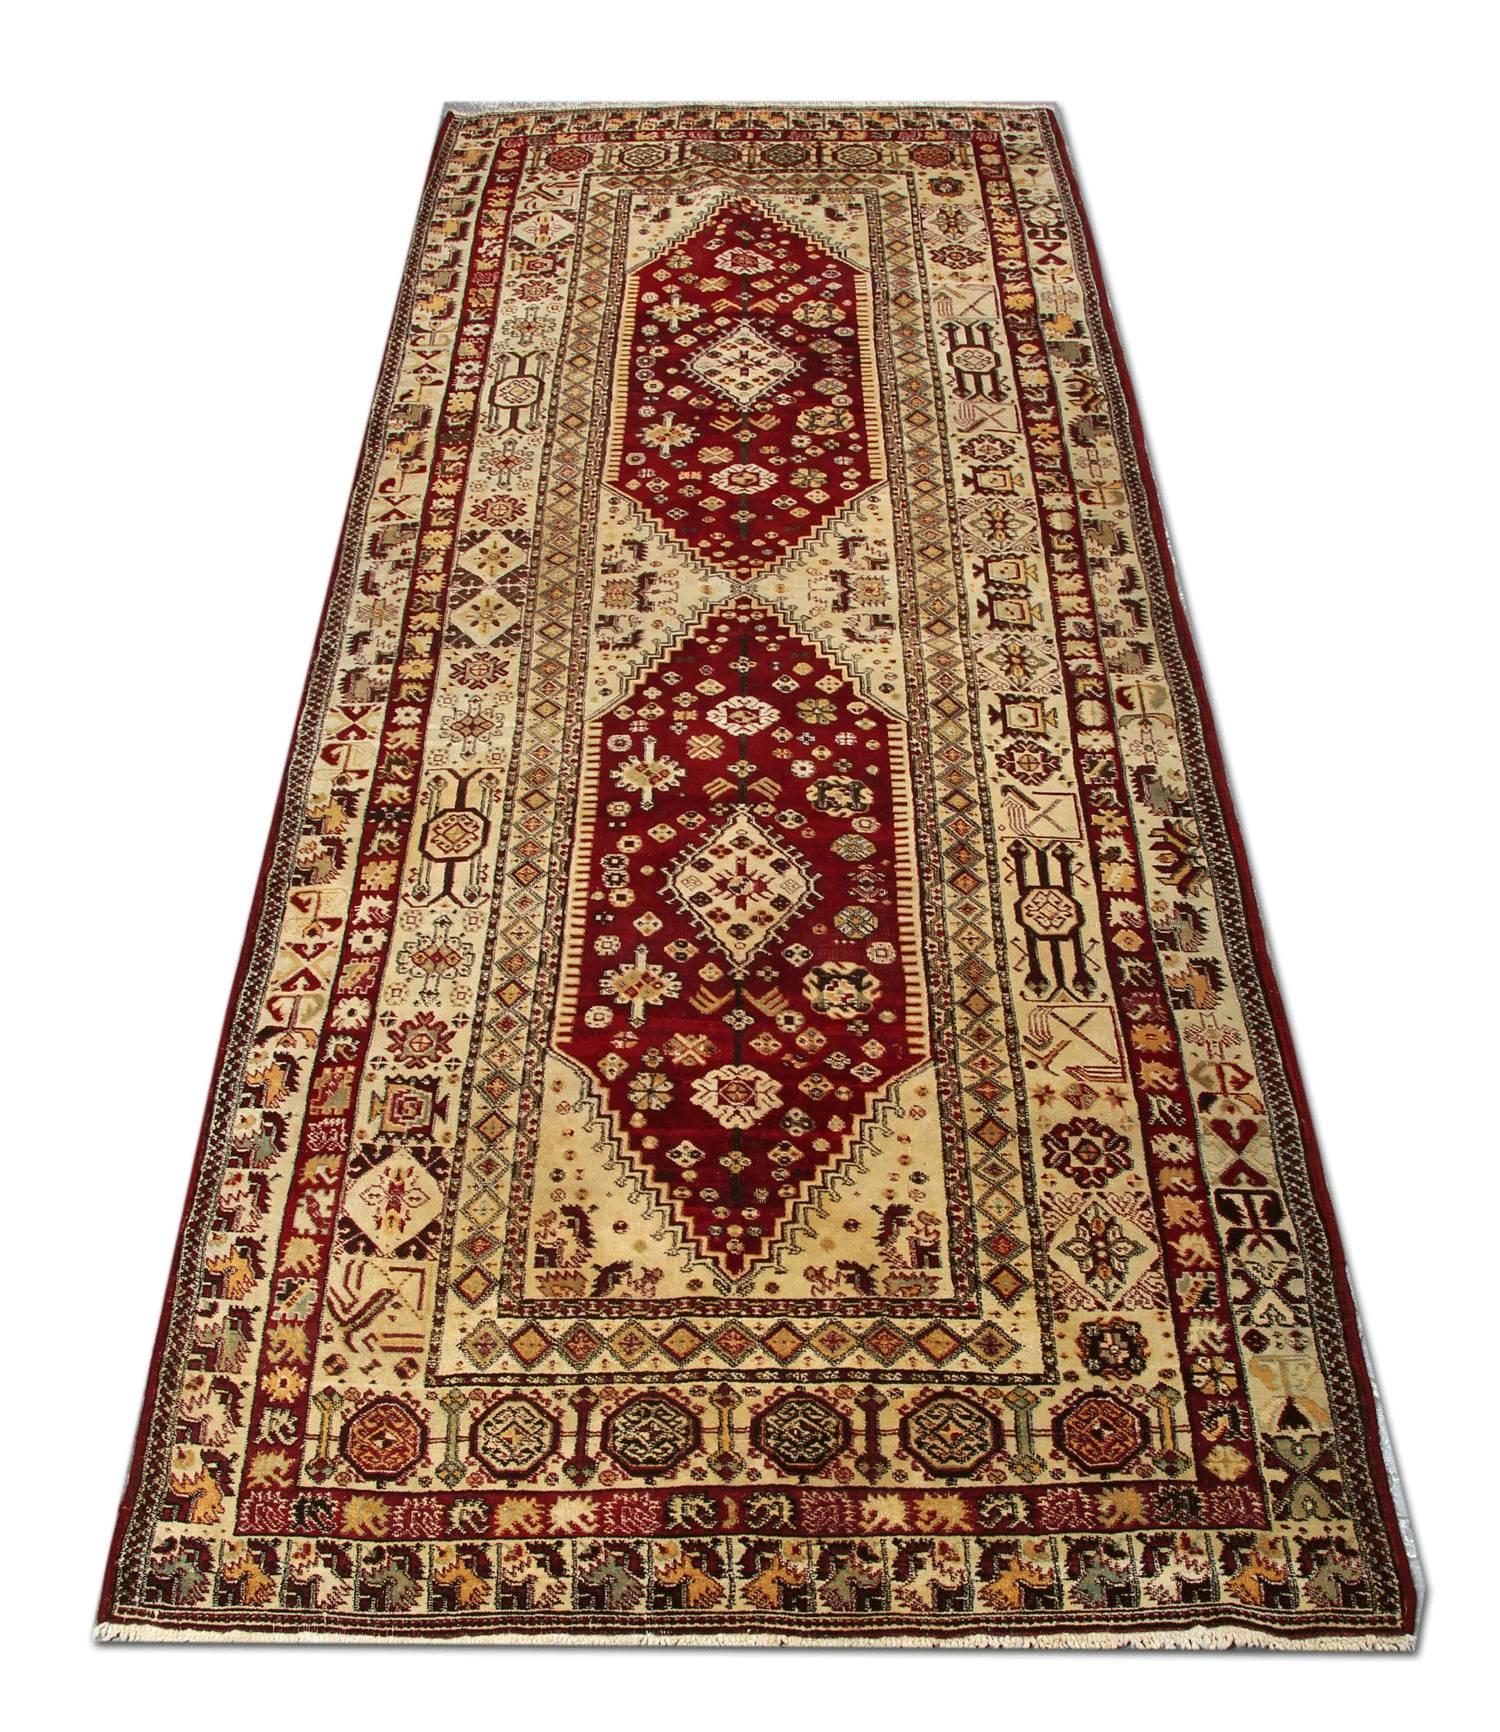 This handmade carpet oriental rug is an Indian Agra floral rug in a very good condition. The rust colour on this woven rug has sat in harmony with the lime green and the gold colour of the carpet. The segmented border of this carpet rug gives it the